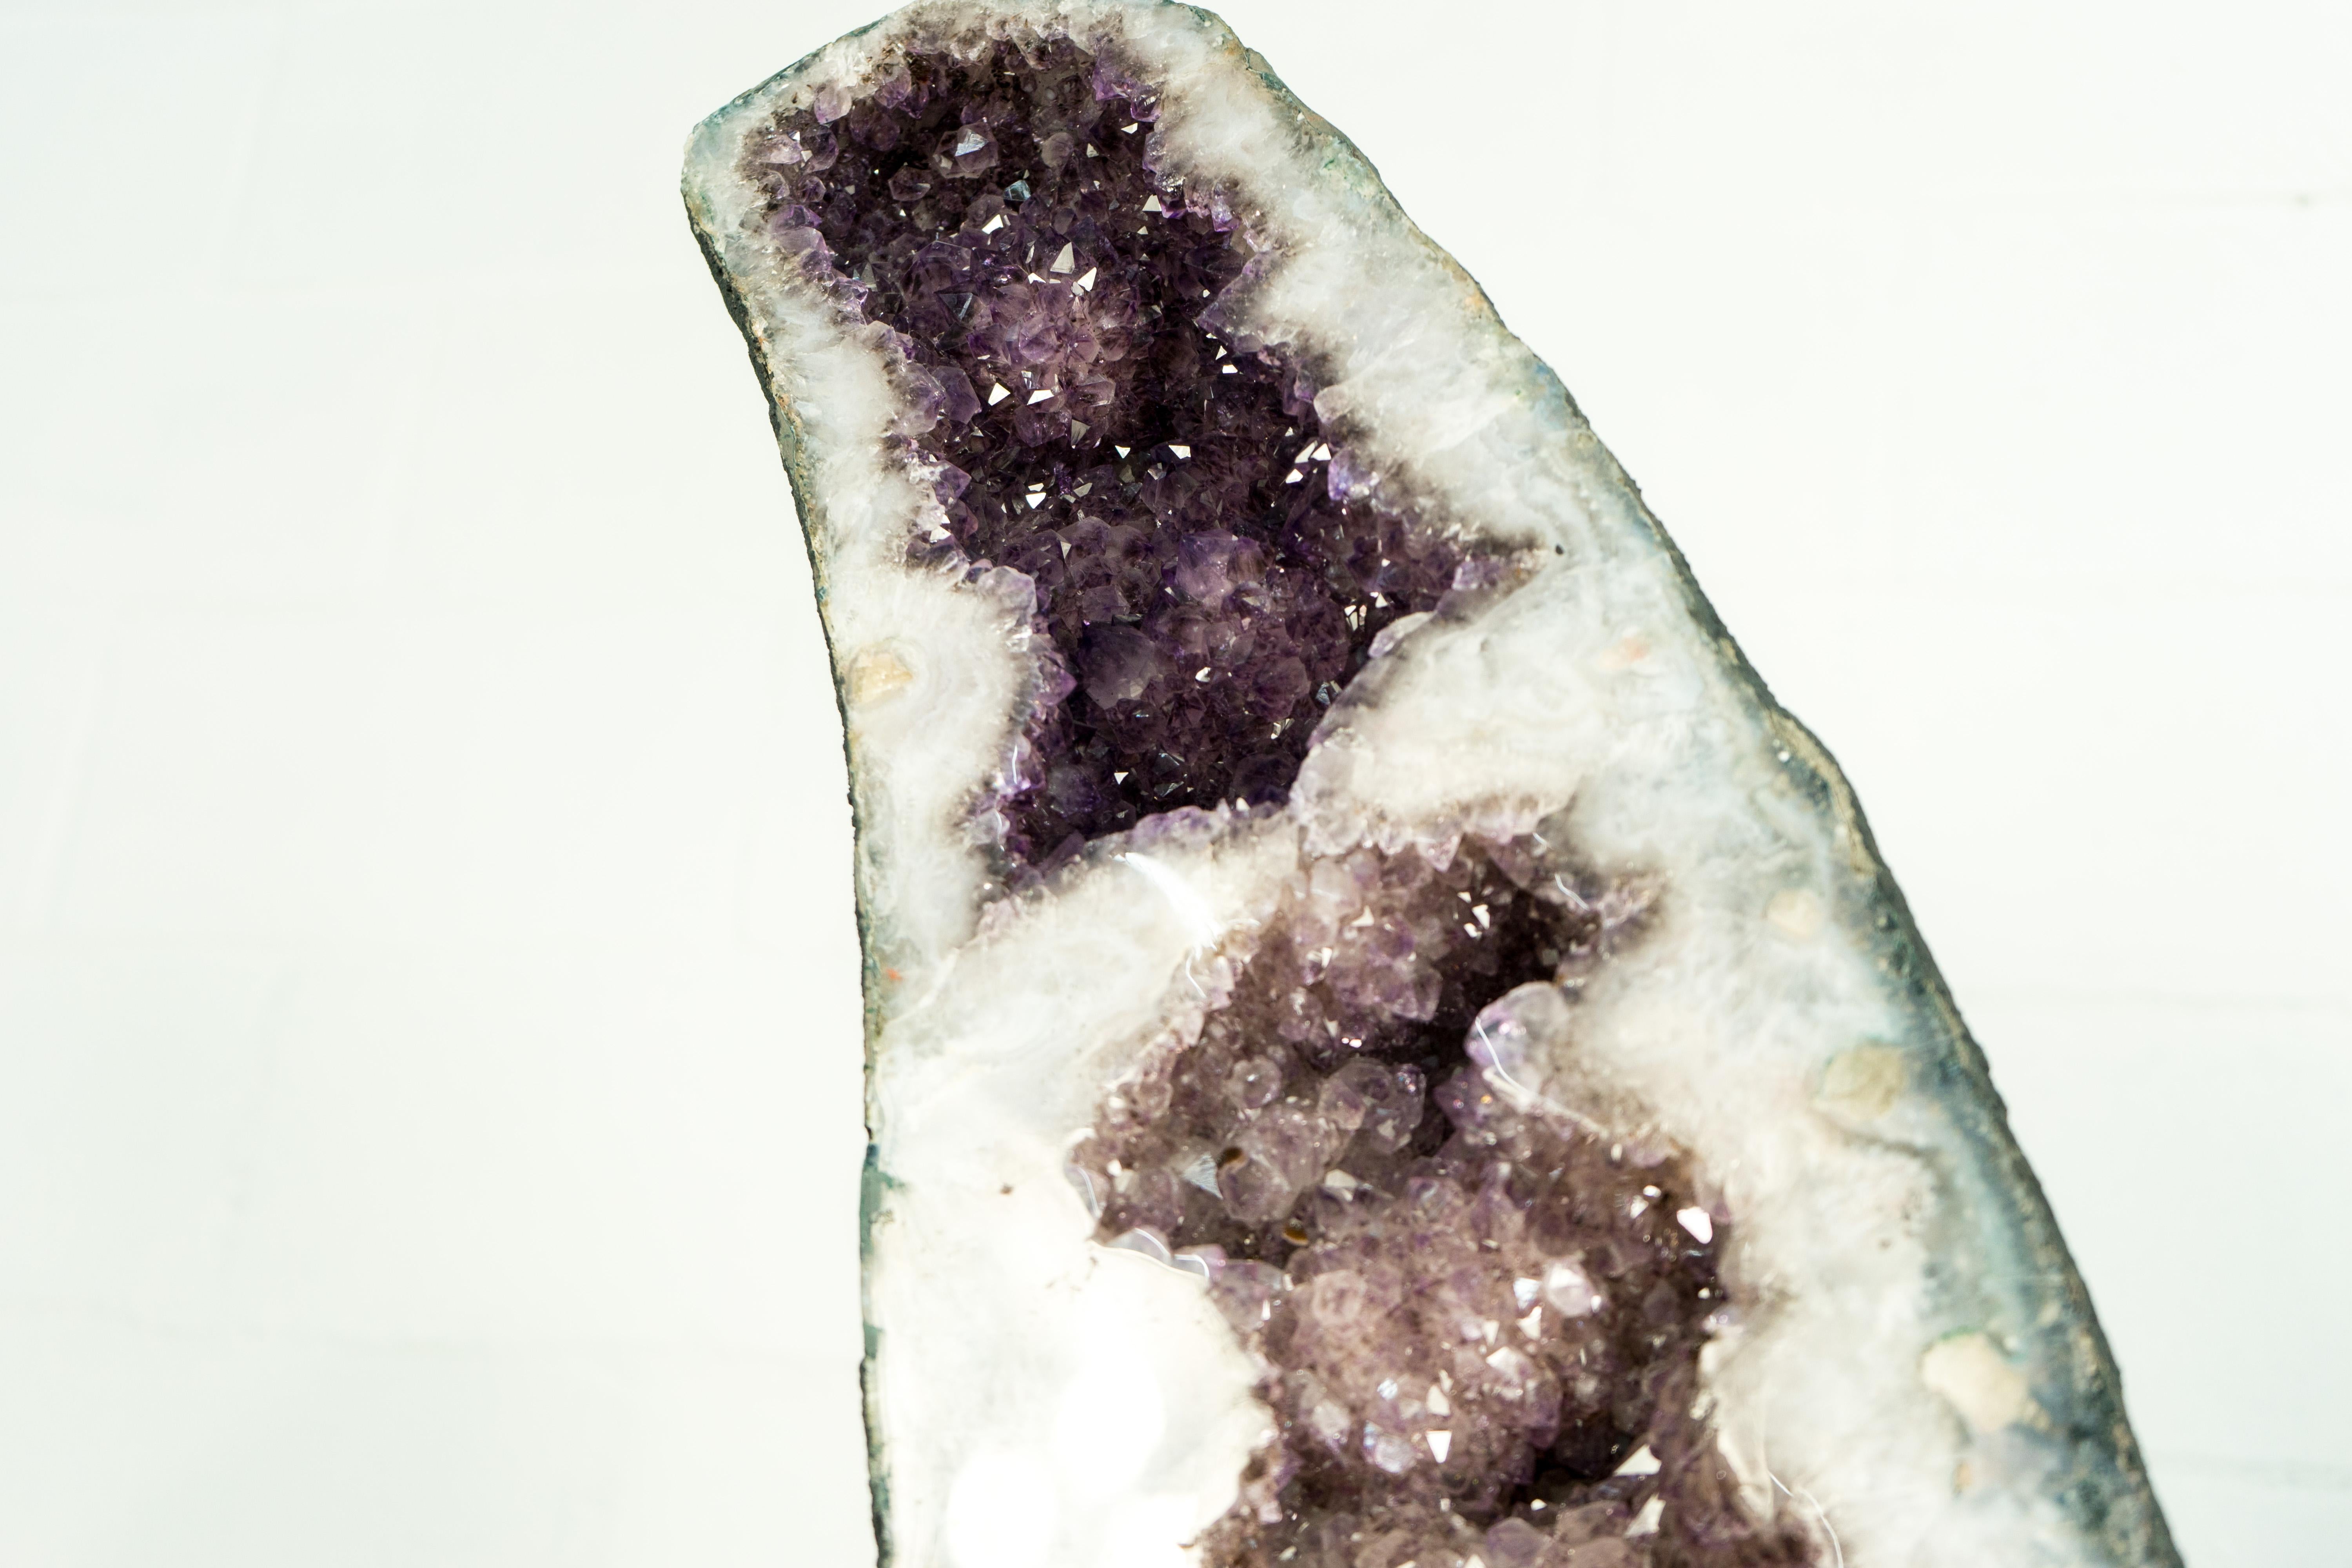 Gorgeous X-Large, 6.7 Feet Tall Amethyst Geode Wings Filled with Stalactites, Golden Cacoxenite and Shiny, Lavender Purple Amethyst Druzy 

▫️ Description

A pair of Amethyst Geode Wings with a rare, gorgeous butterfly formation. These geodes are